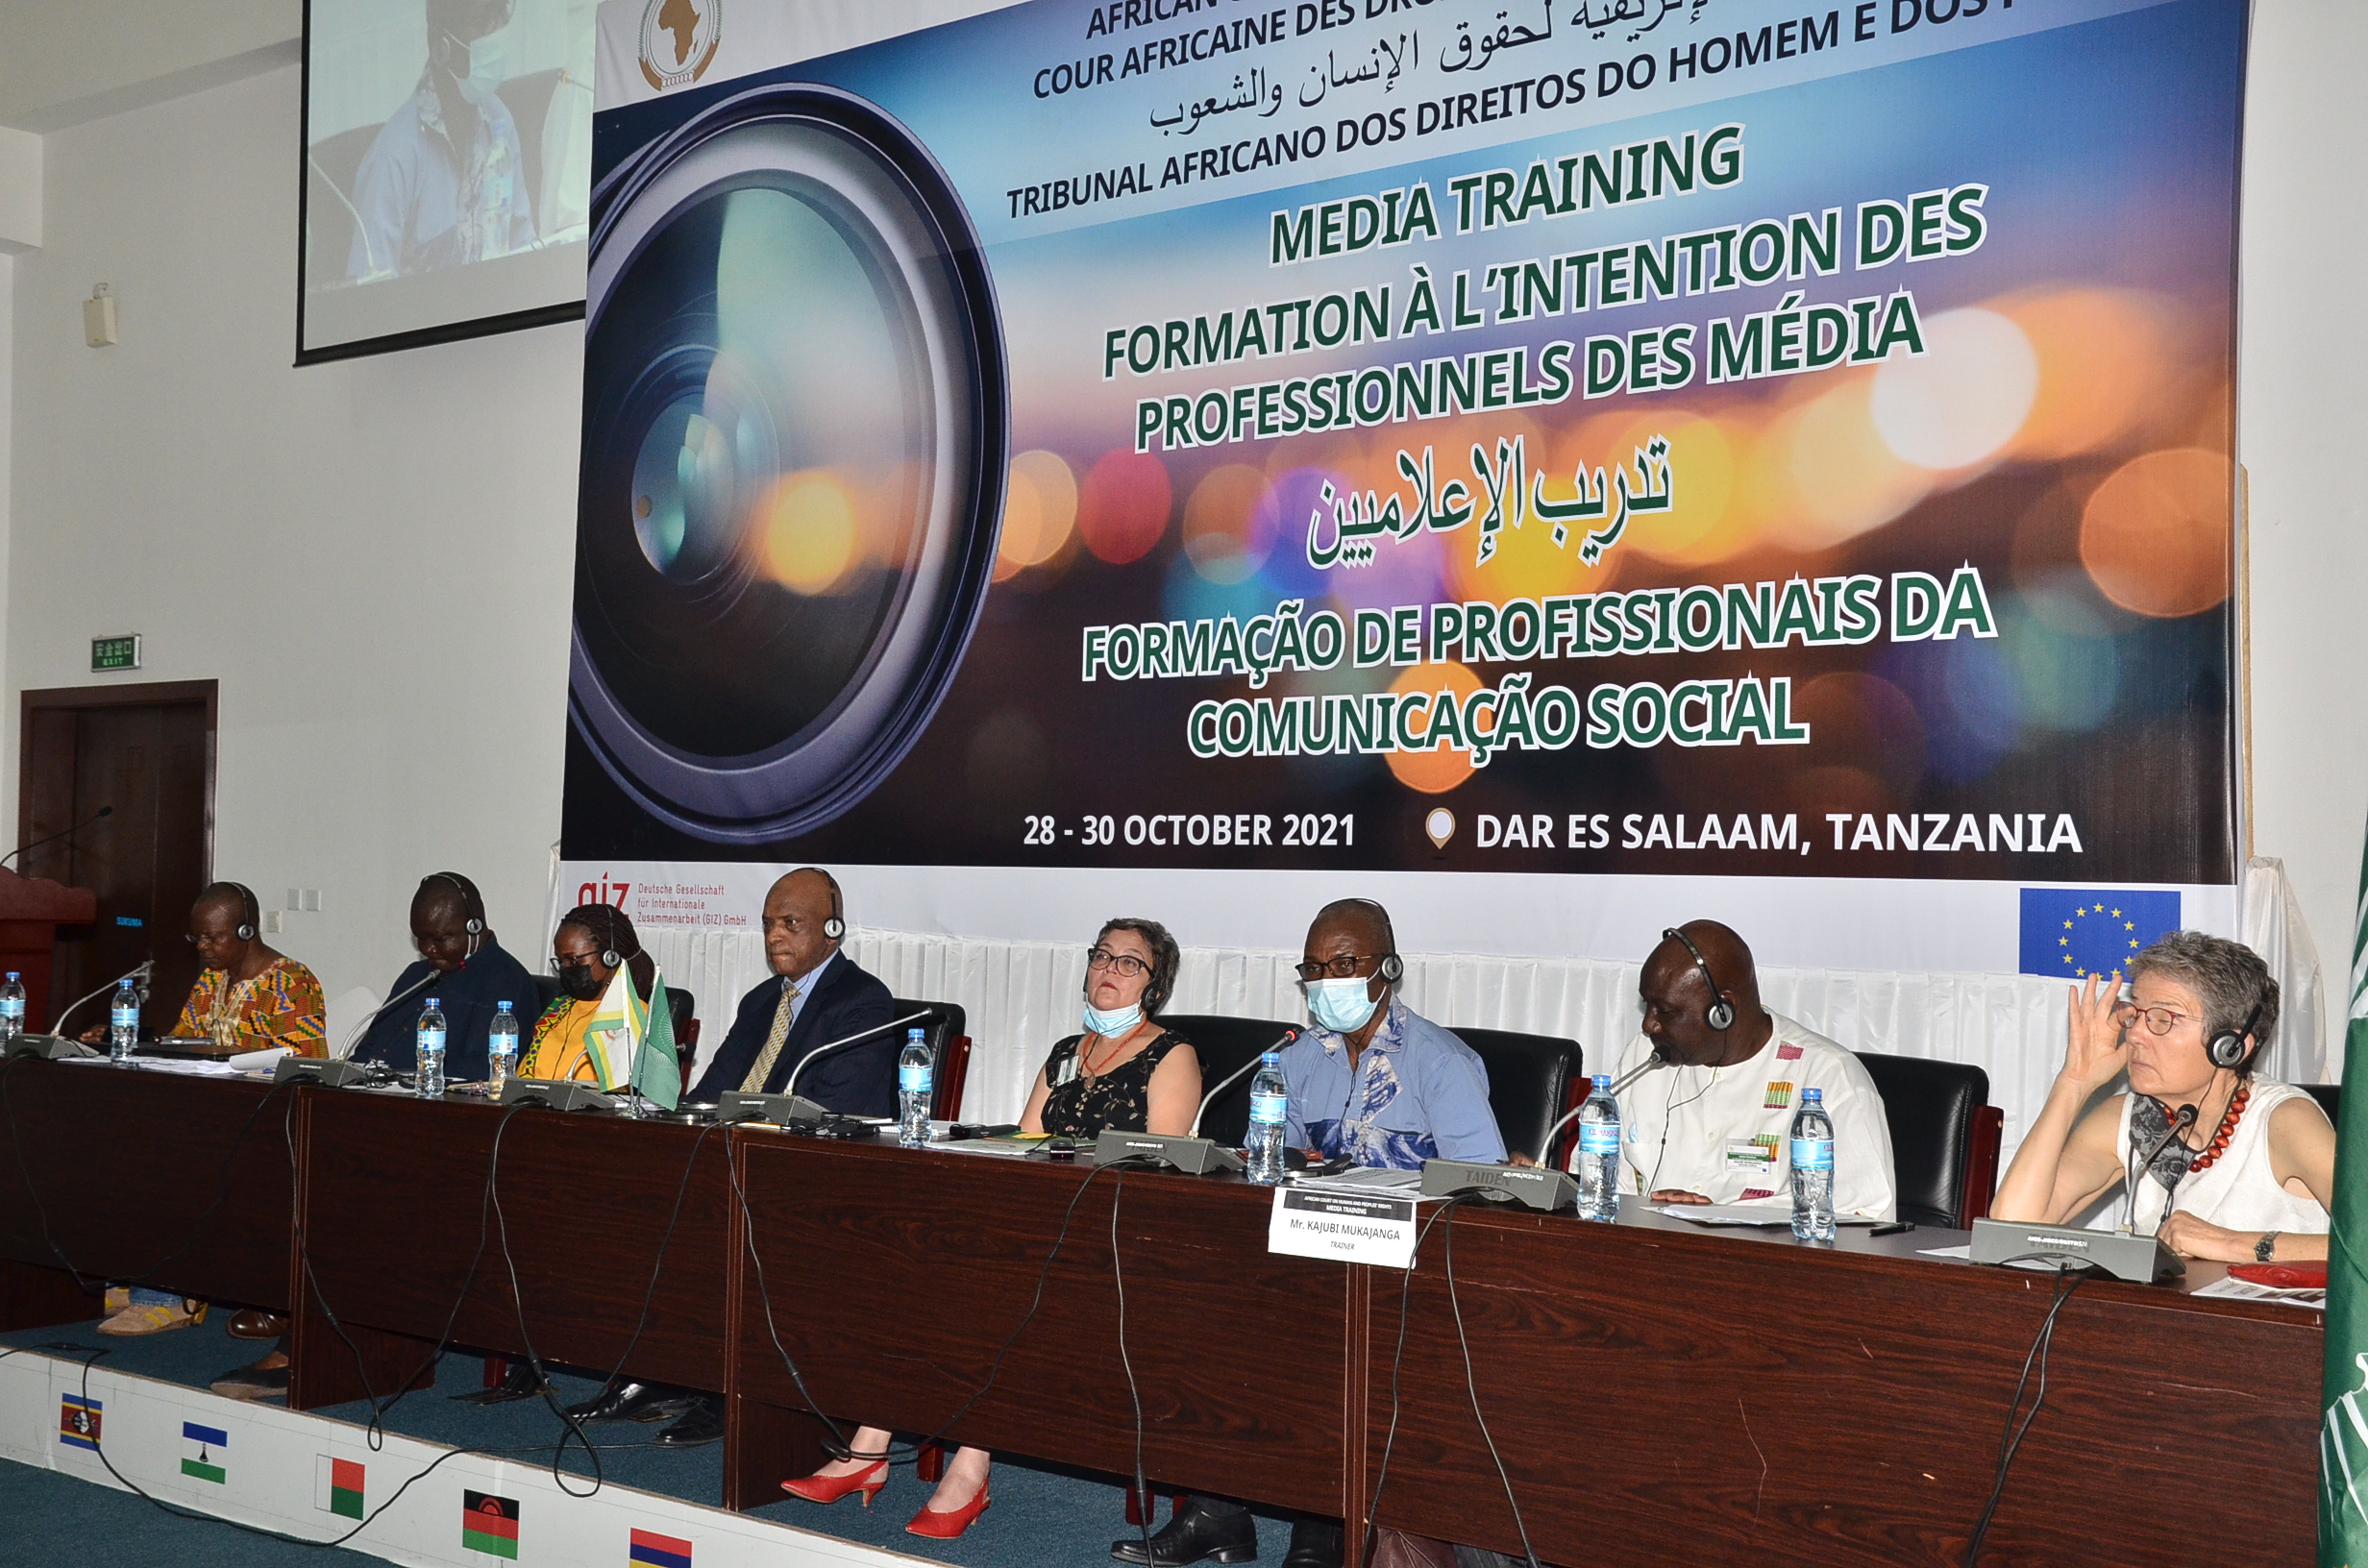 AFRICAN JOURNALISTS ATTEND AFRICAN COURT MEDIA TRAINING